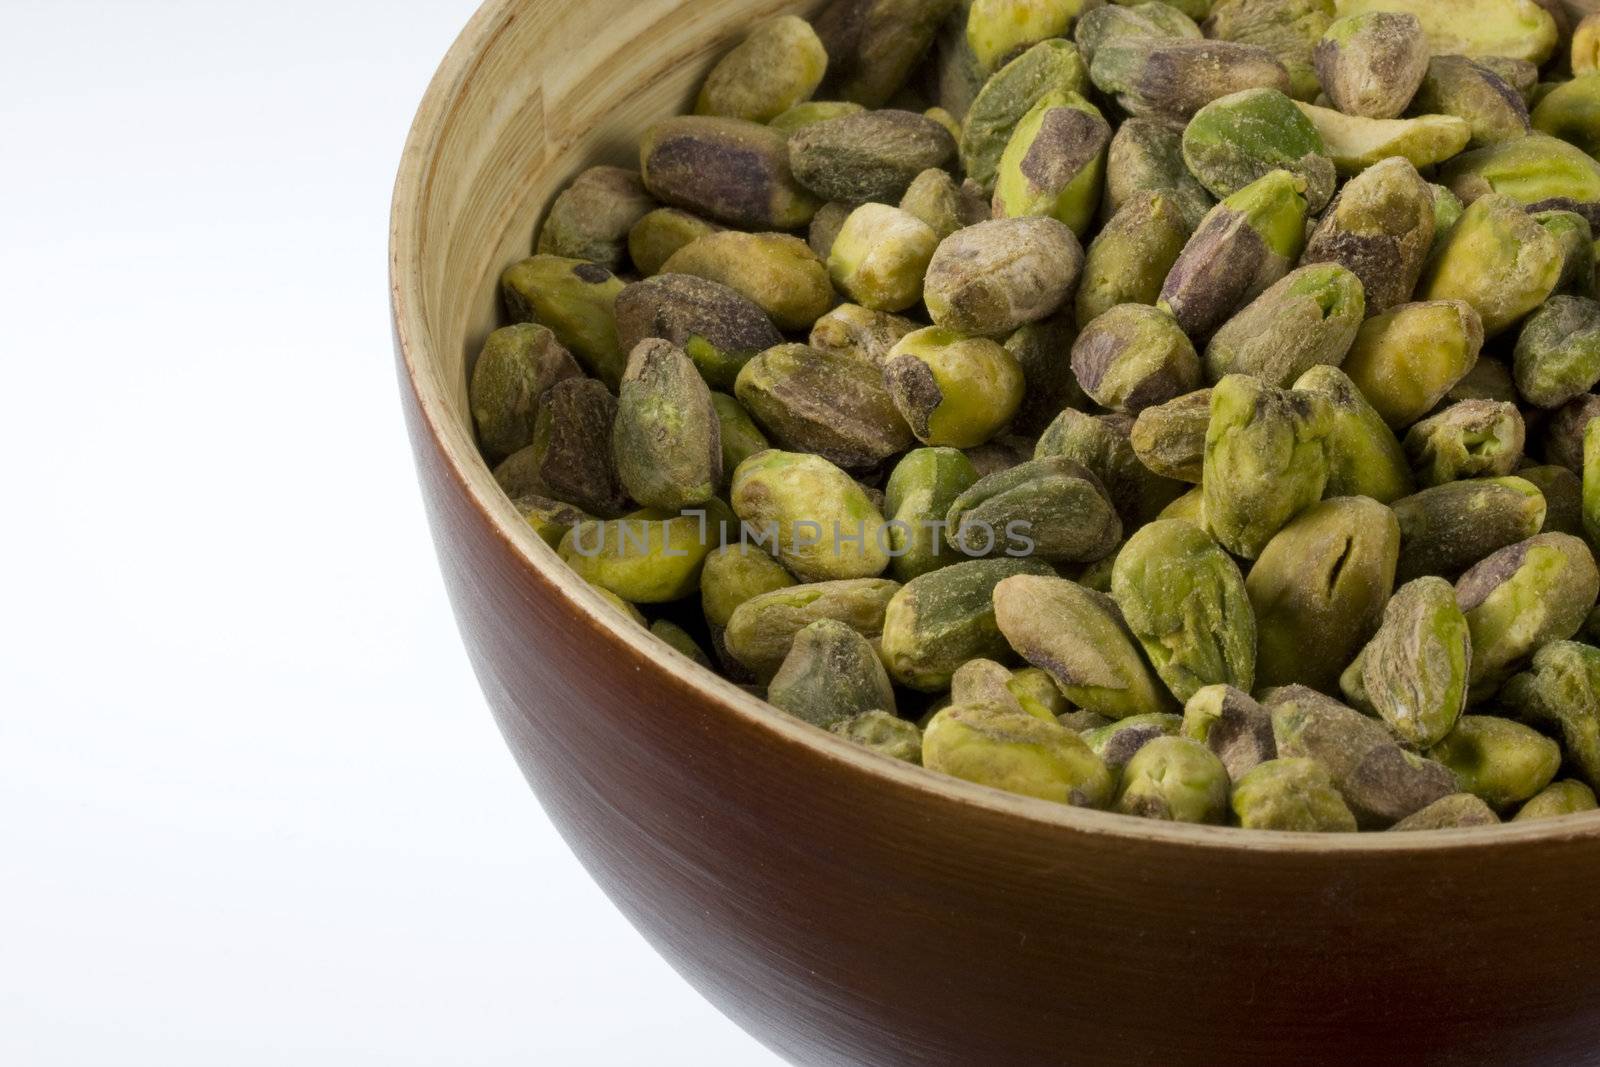 a wooden bowl of shelled pistachio nuts against white background